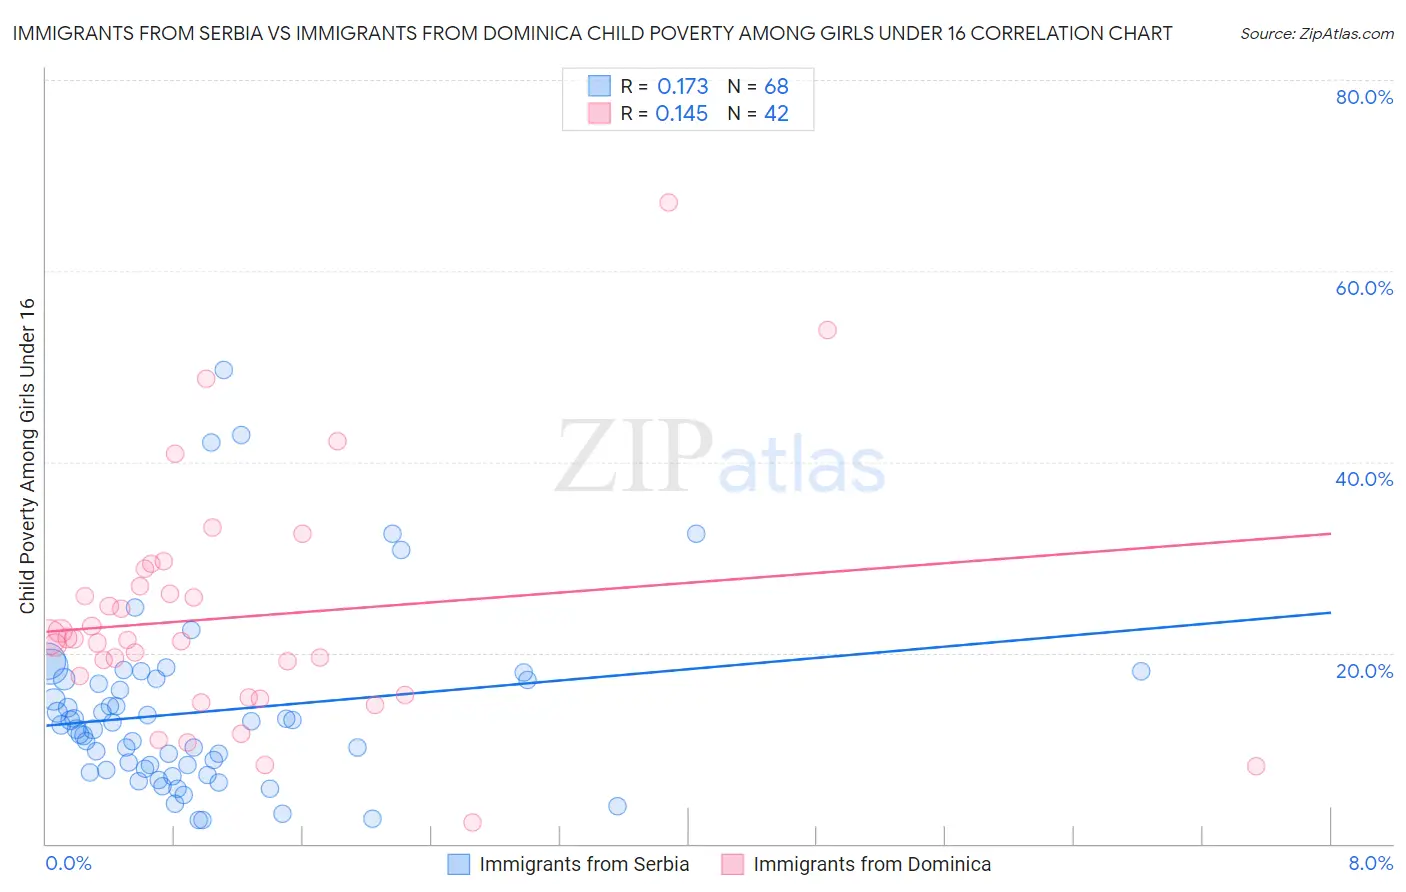 Immigrants from Serbia vs Immigrants from Dominica Child Poverty Among Girls Under 16